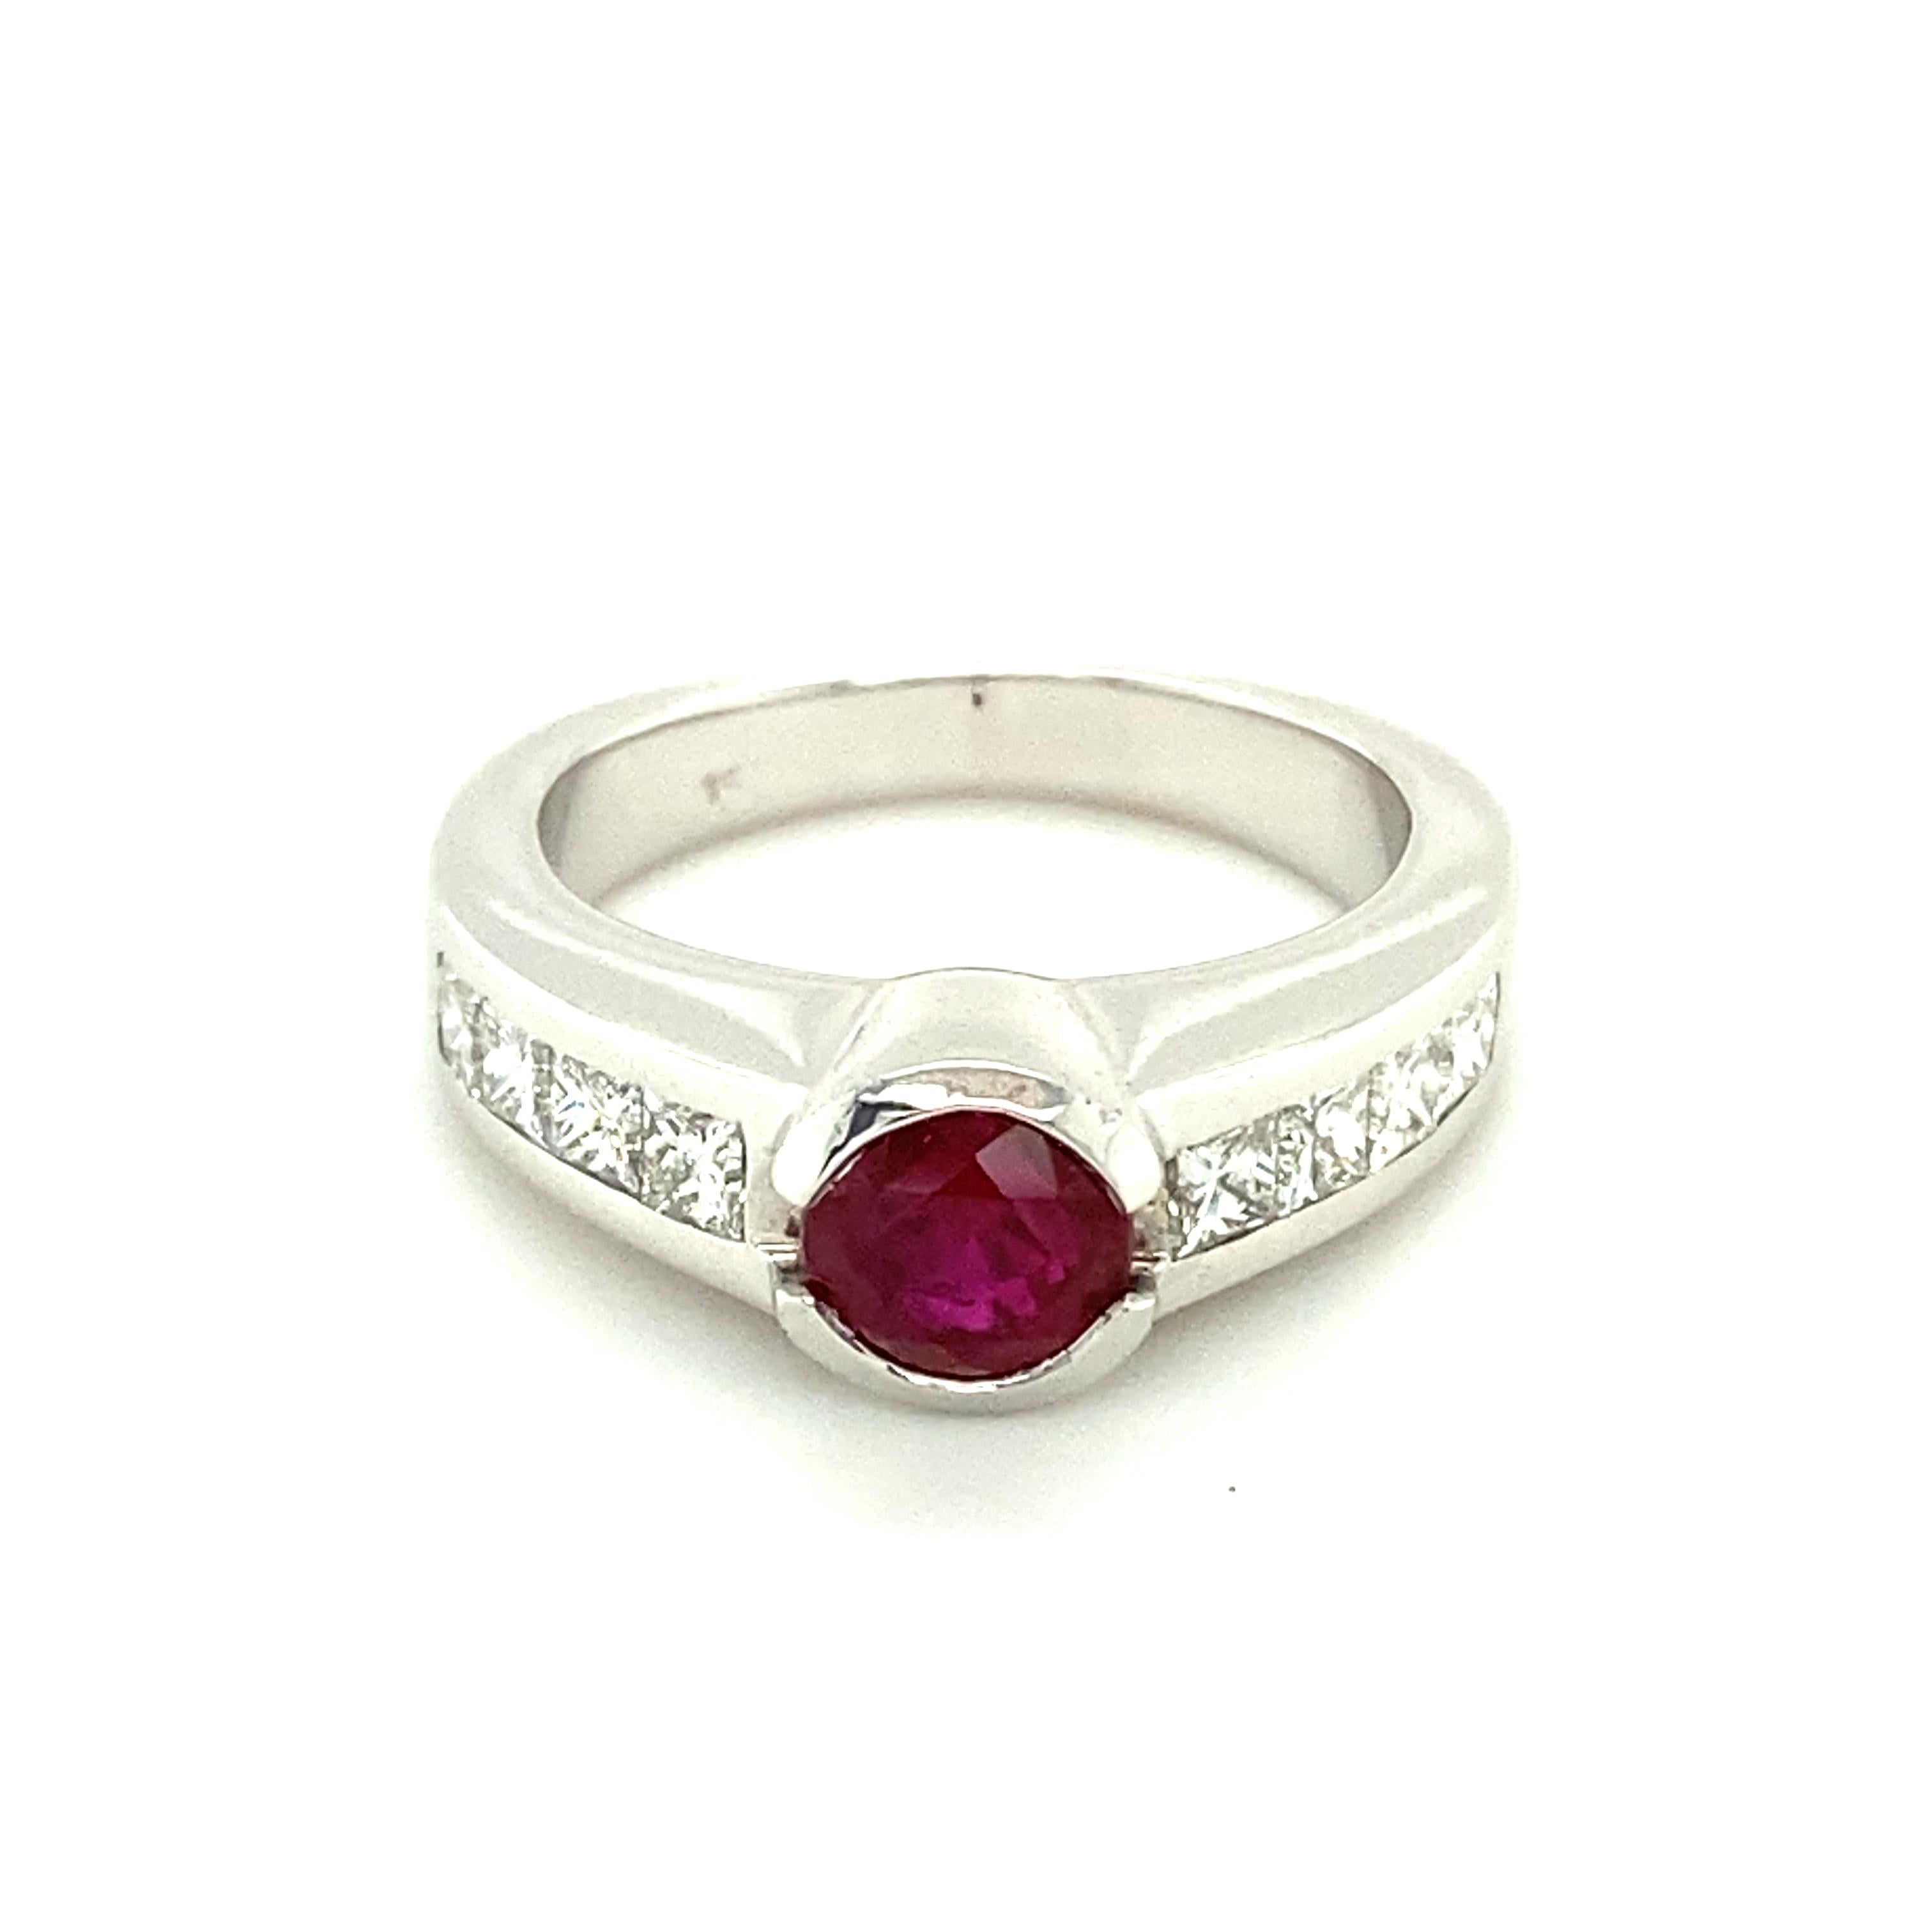 This beautiful ring in 18 karat white gold is set with a round facetted Burmese ruby of vivid colour, weighing approximately 1.27 carats. 
Set in a half-bezel, the lively ruby is accented by 8 channel set princess-cut diamonds of G/H colour and vs